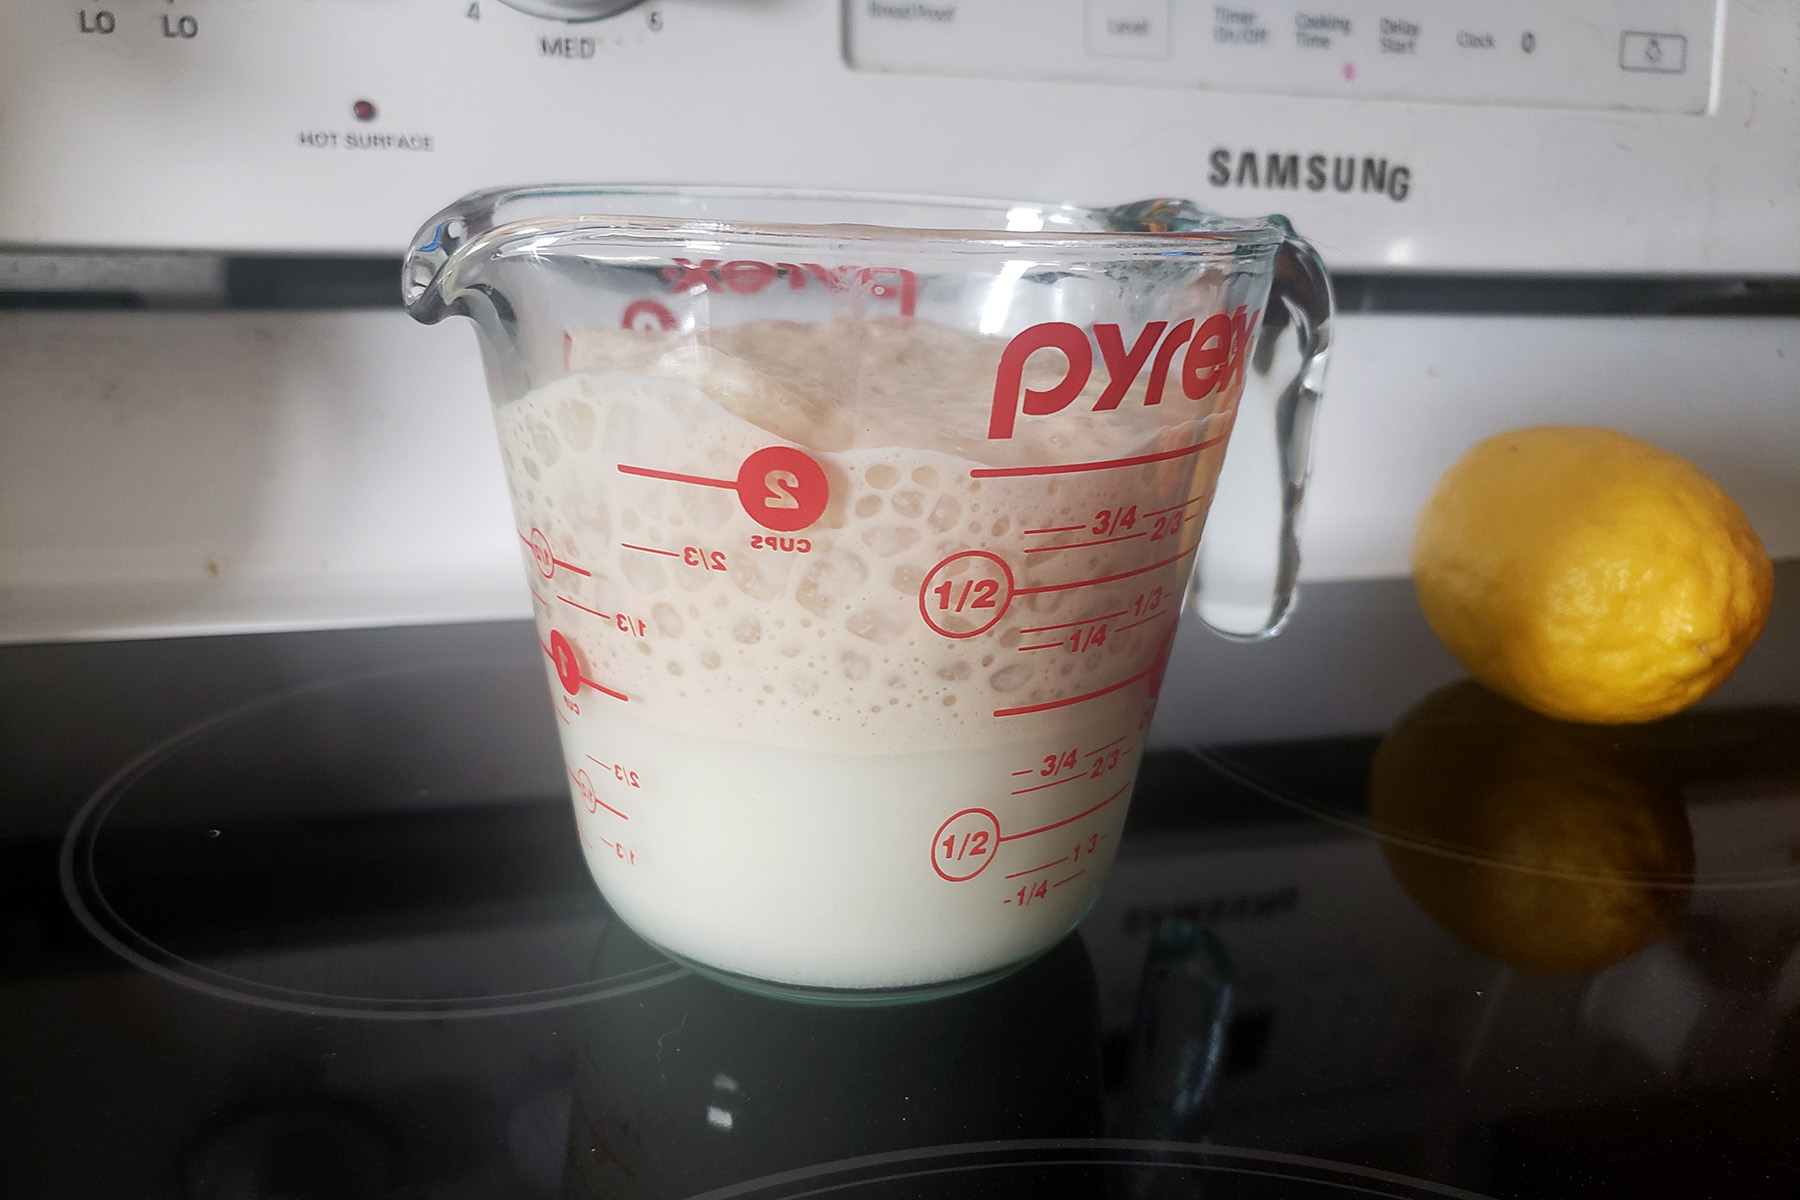 A measuring cup half full of milk. The top is frothy from proofing yeast.